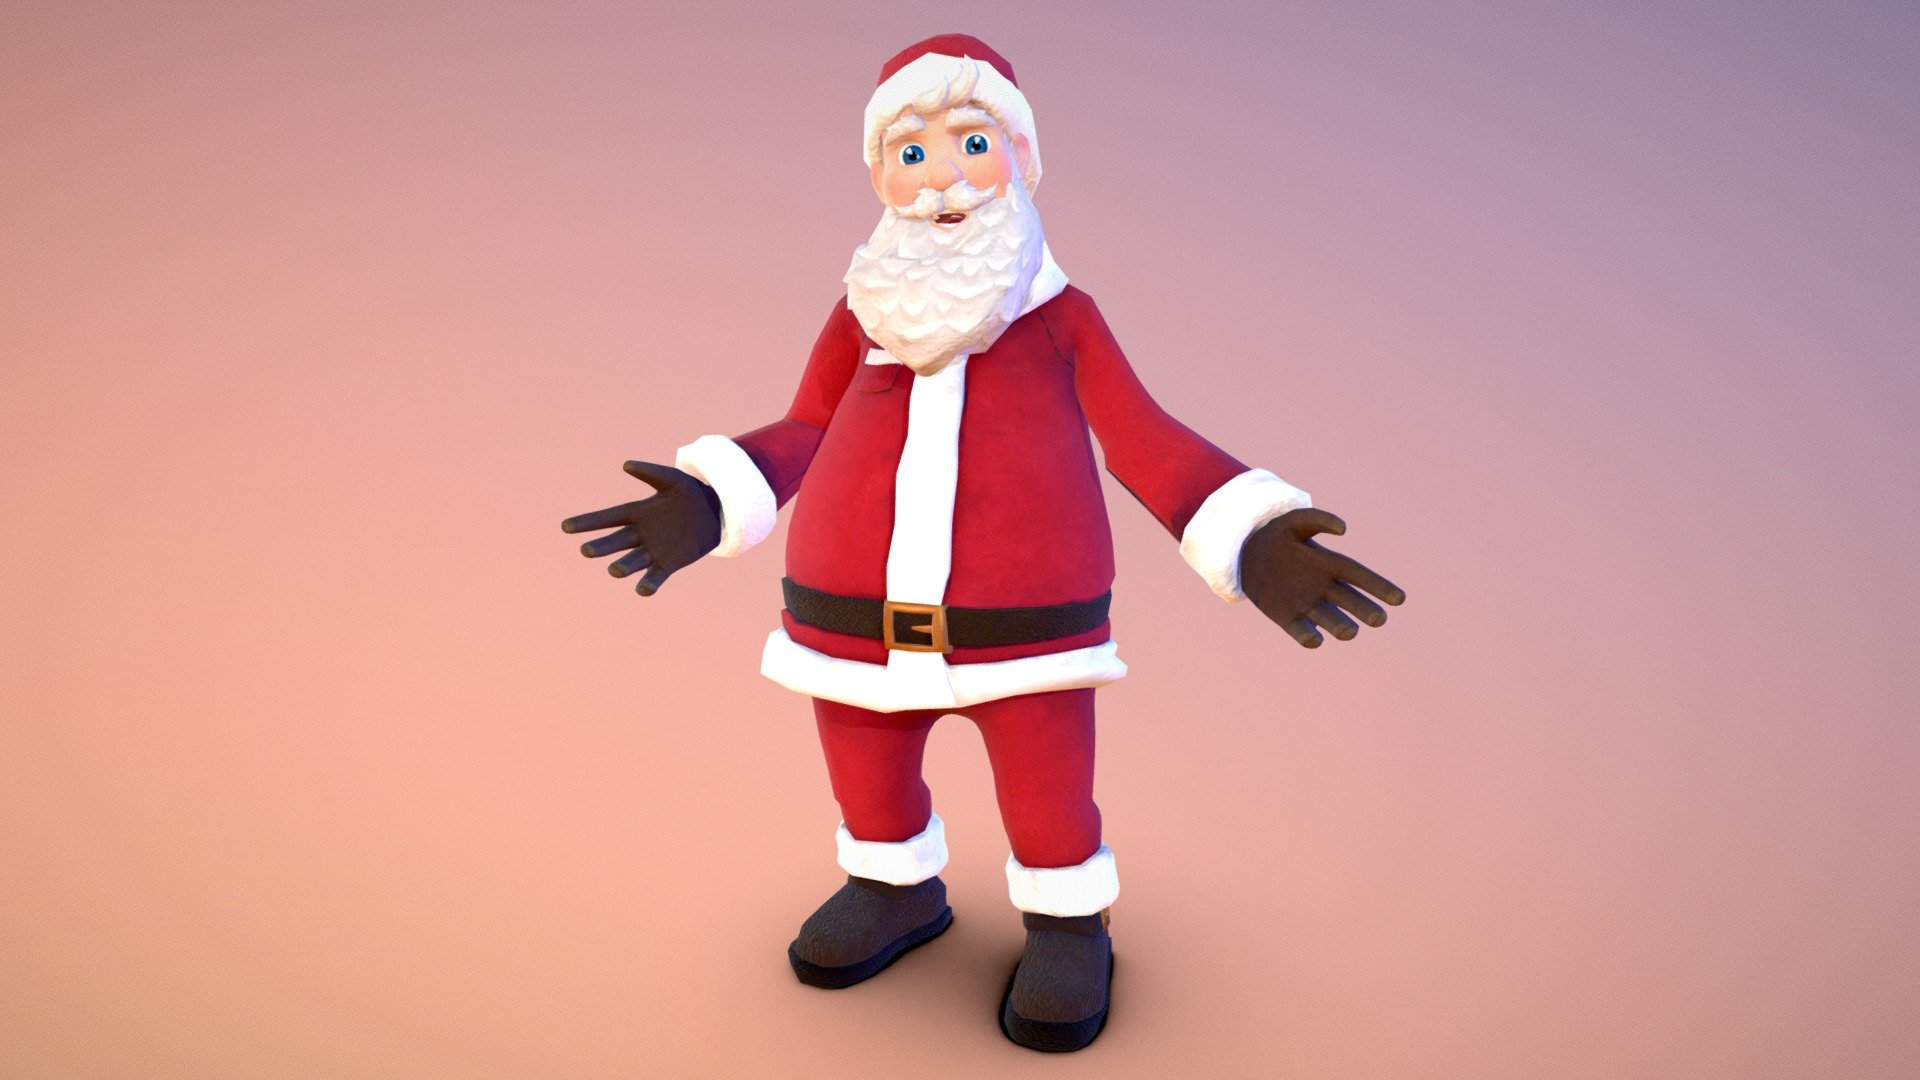 Santa claus 
Cartoon stylized, Low poly
Modeled with Maya
Textures made with Substance Painter - Santa Claus - Low poly stylized - 3D model by Melissa Descubes (@Melissadescubes) 3d model